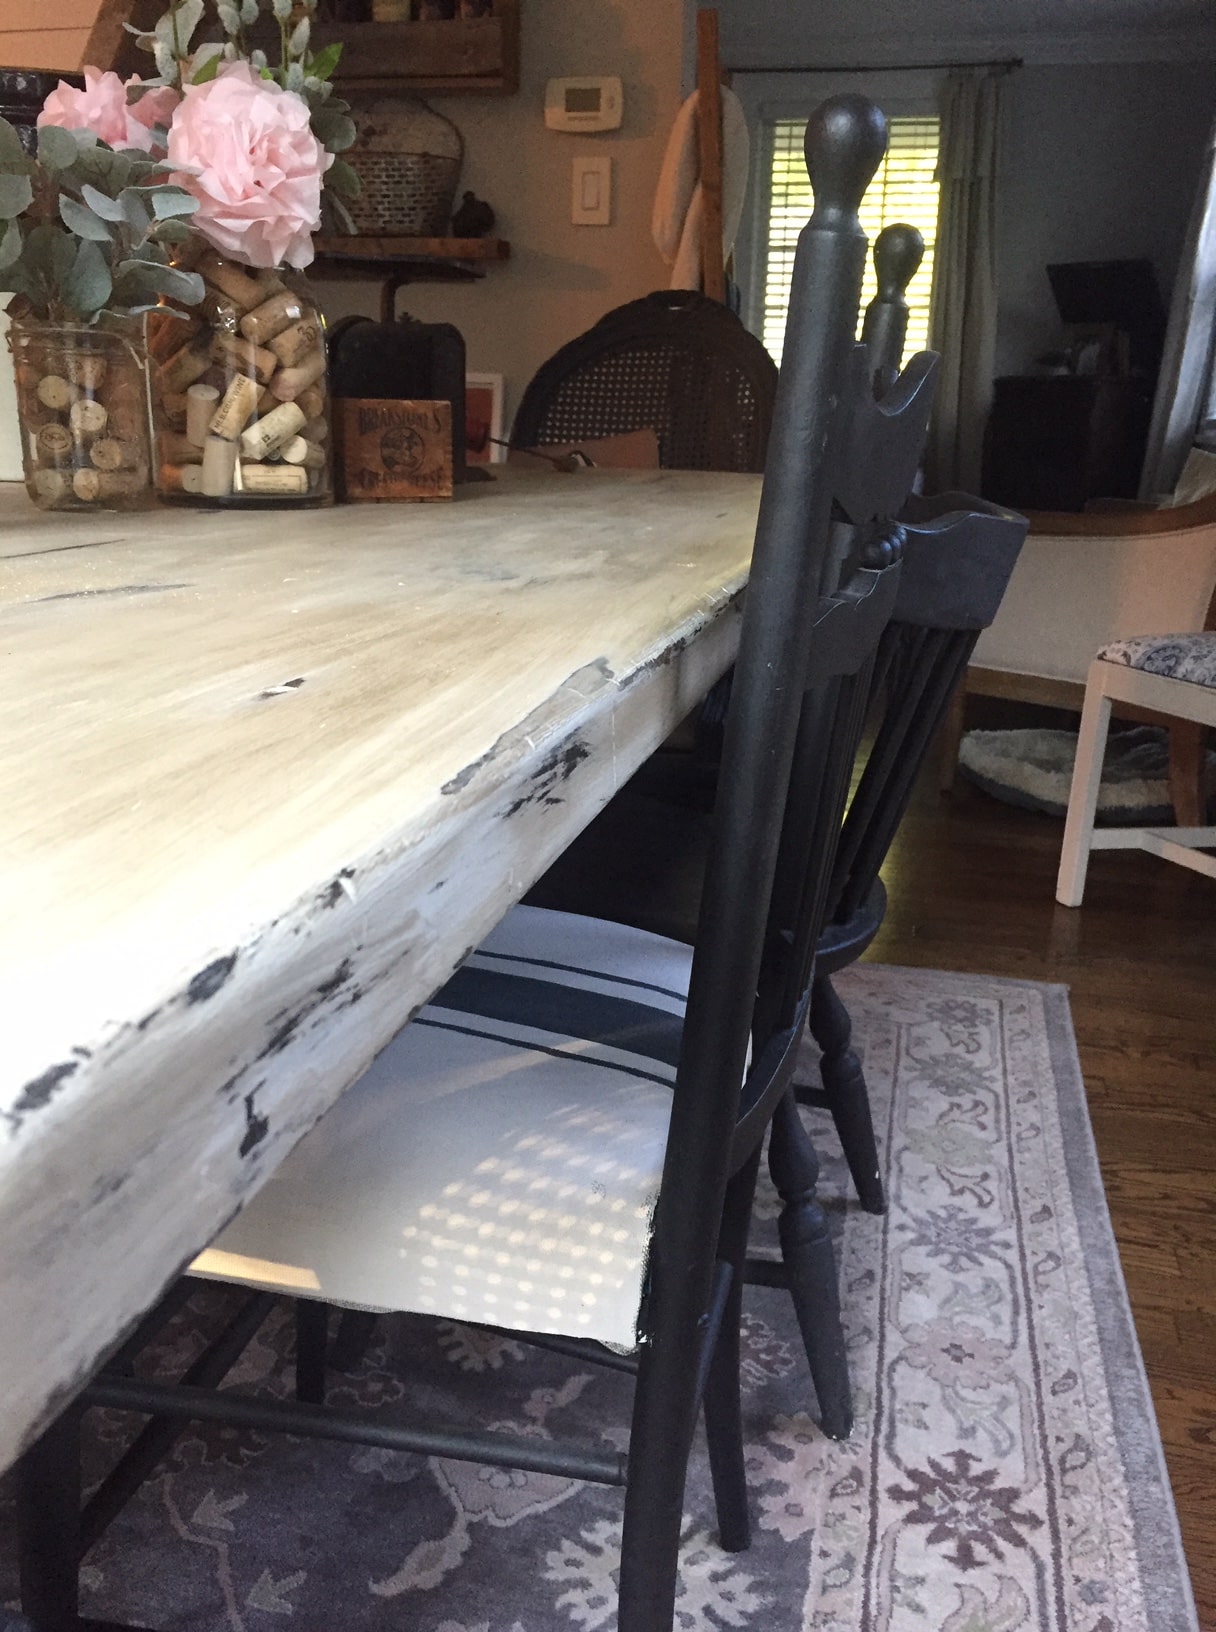 what kind of paint to use on dining room table